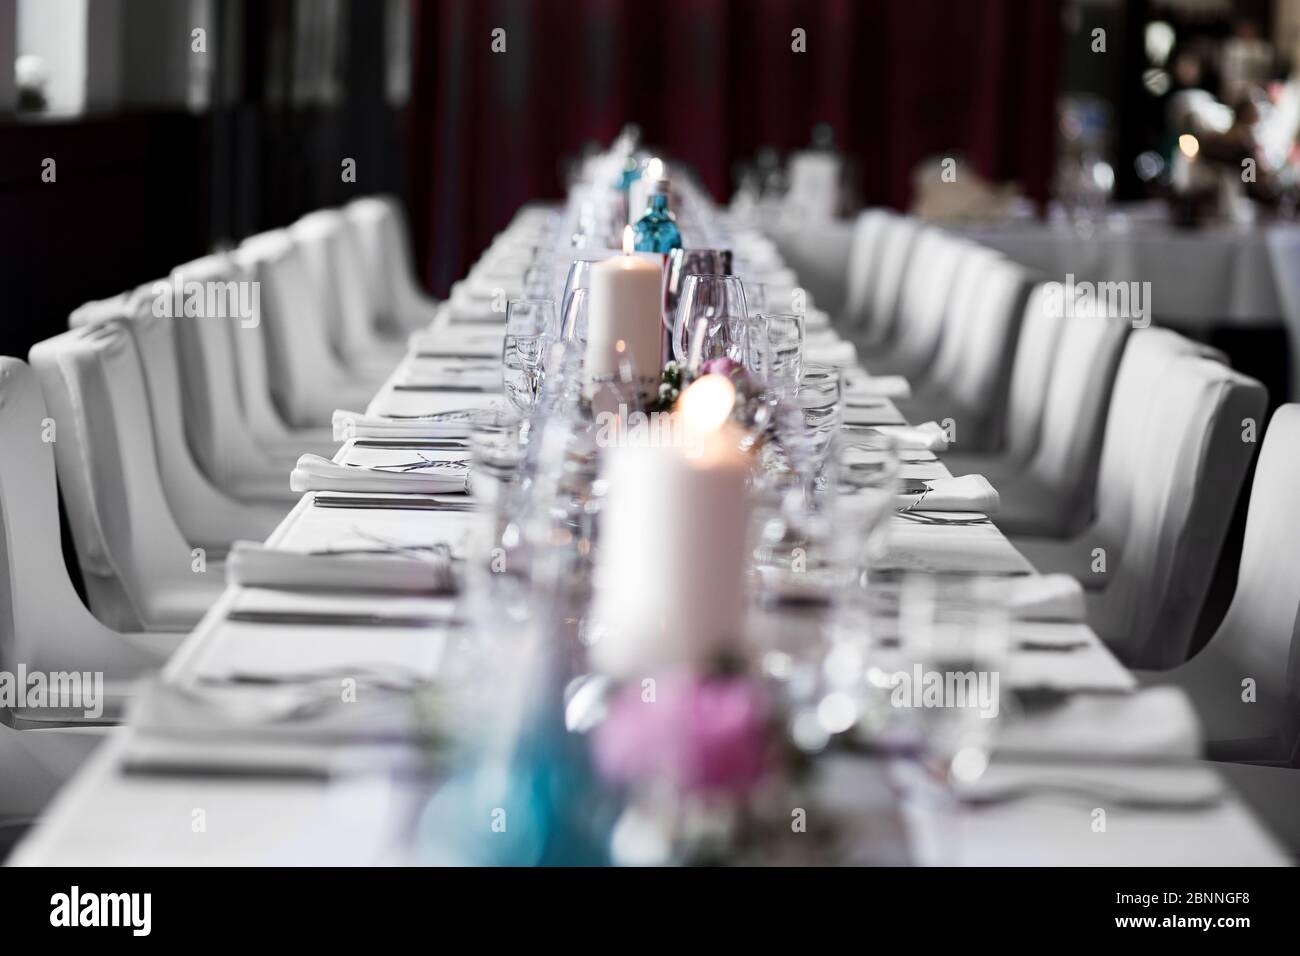 long dinner table white tablecloth candle like wedding table decoration. Event location in a restaurant. Stock Photo